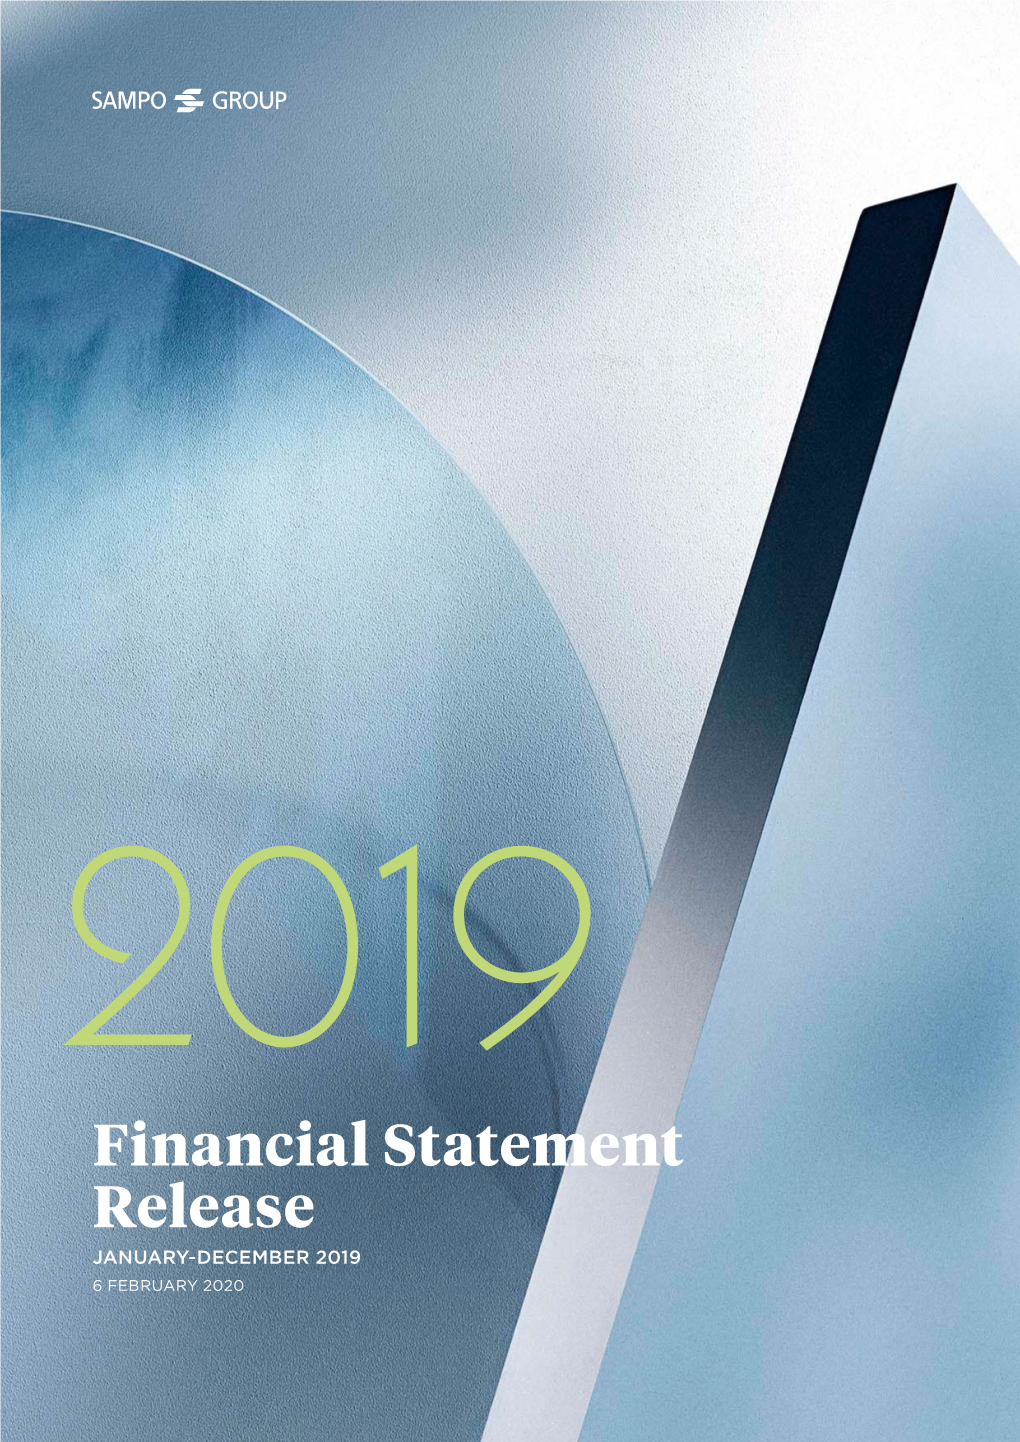 Financial Statement Release JANUARY-DECEMBER 2019 6 FEBRUARY 2020 SAMPO GROUP RESULTS for 2019